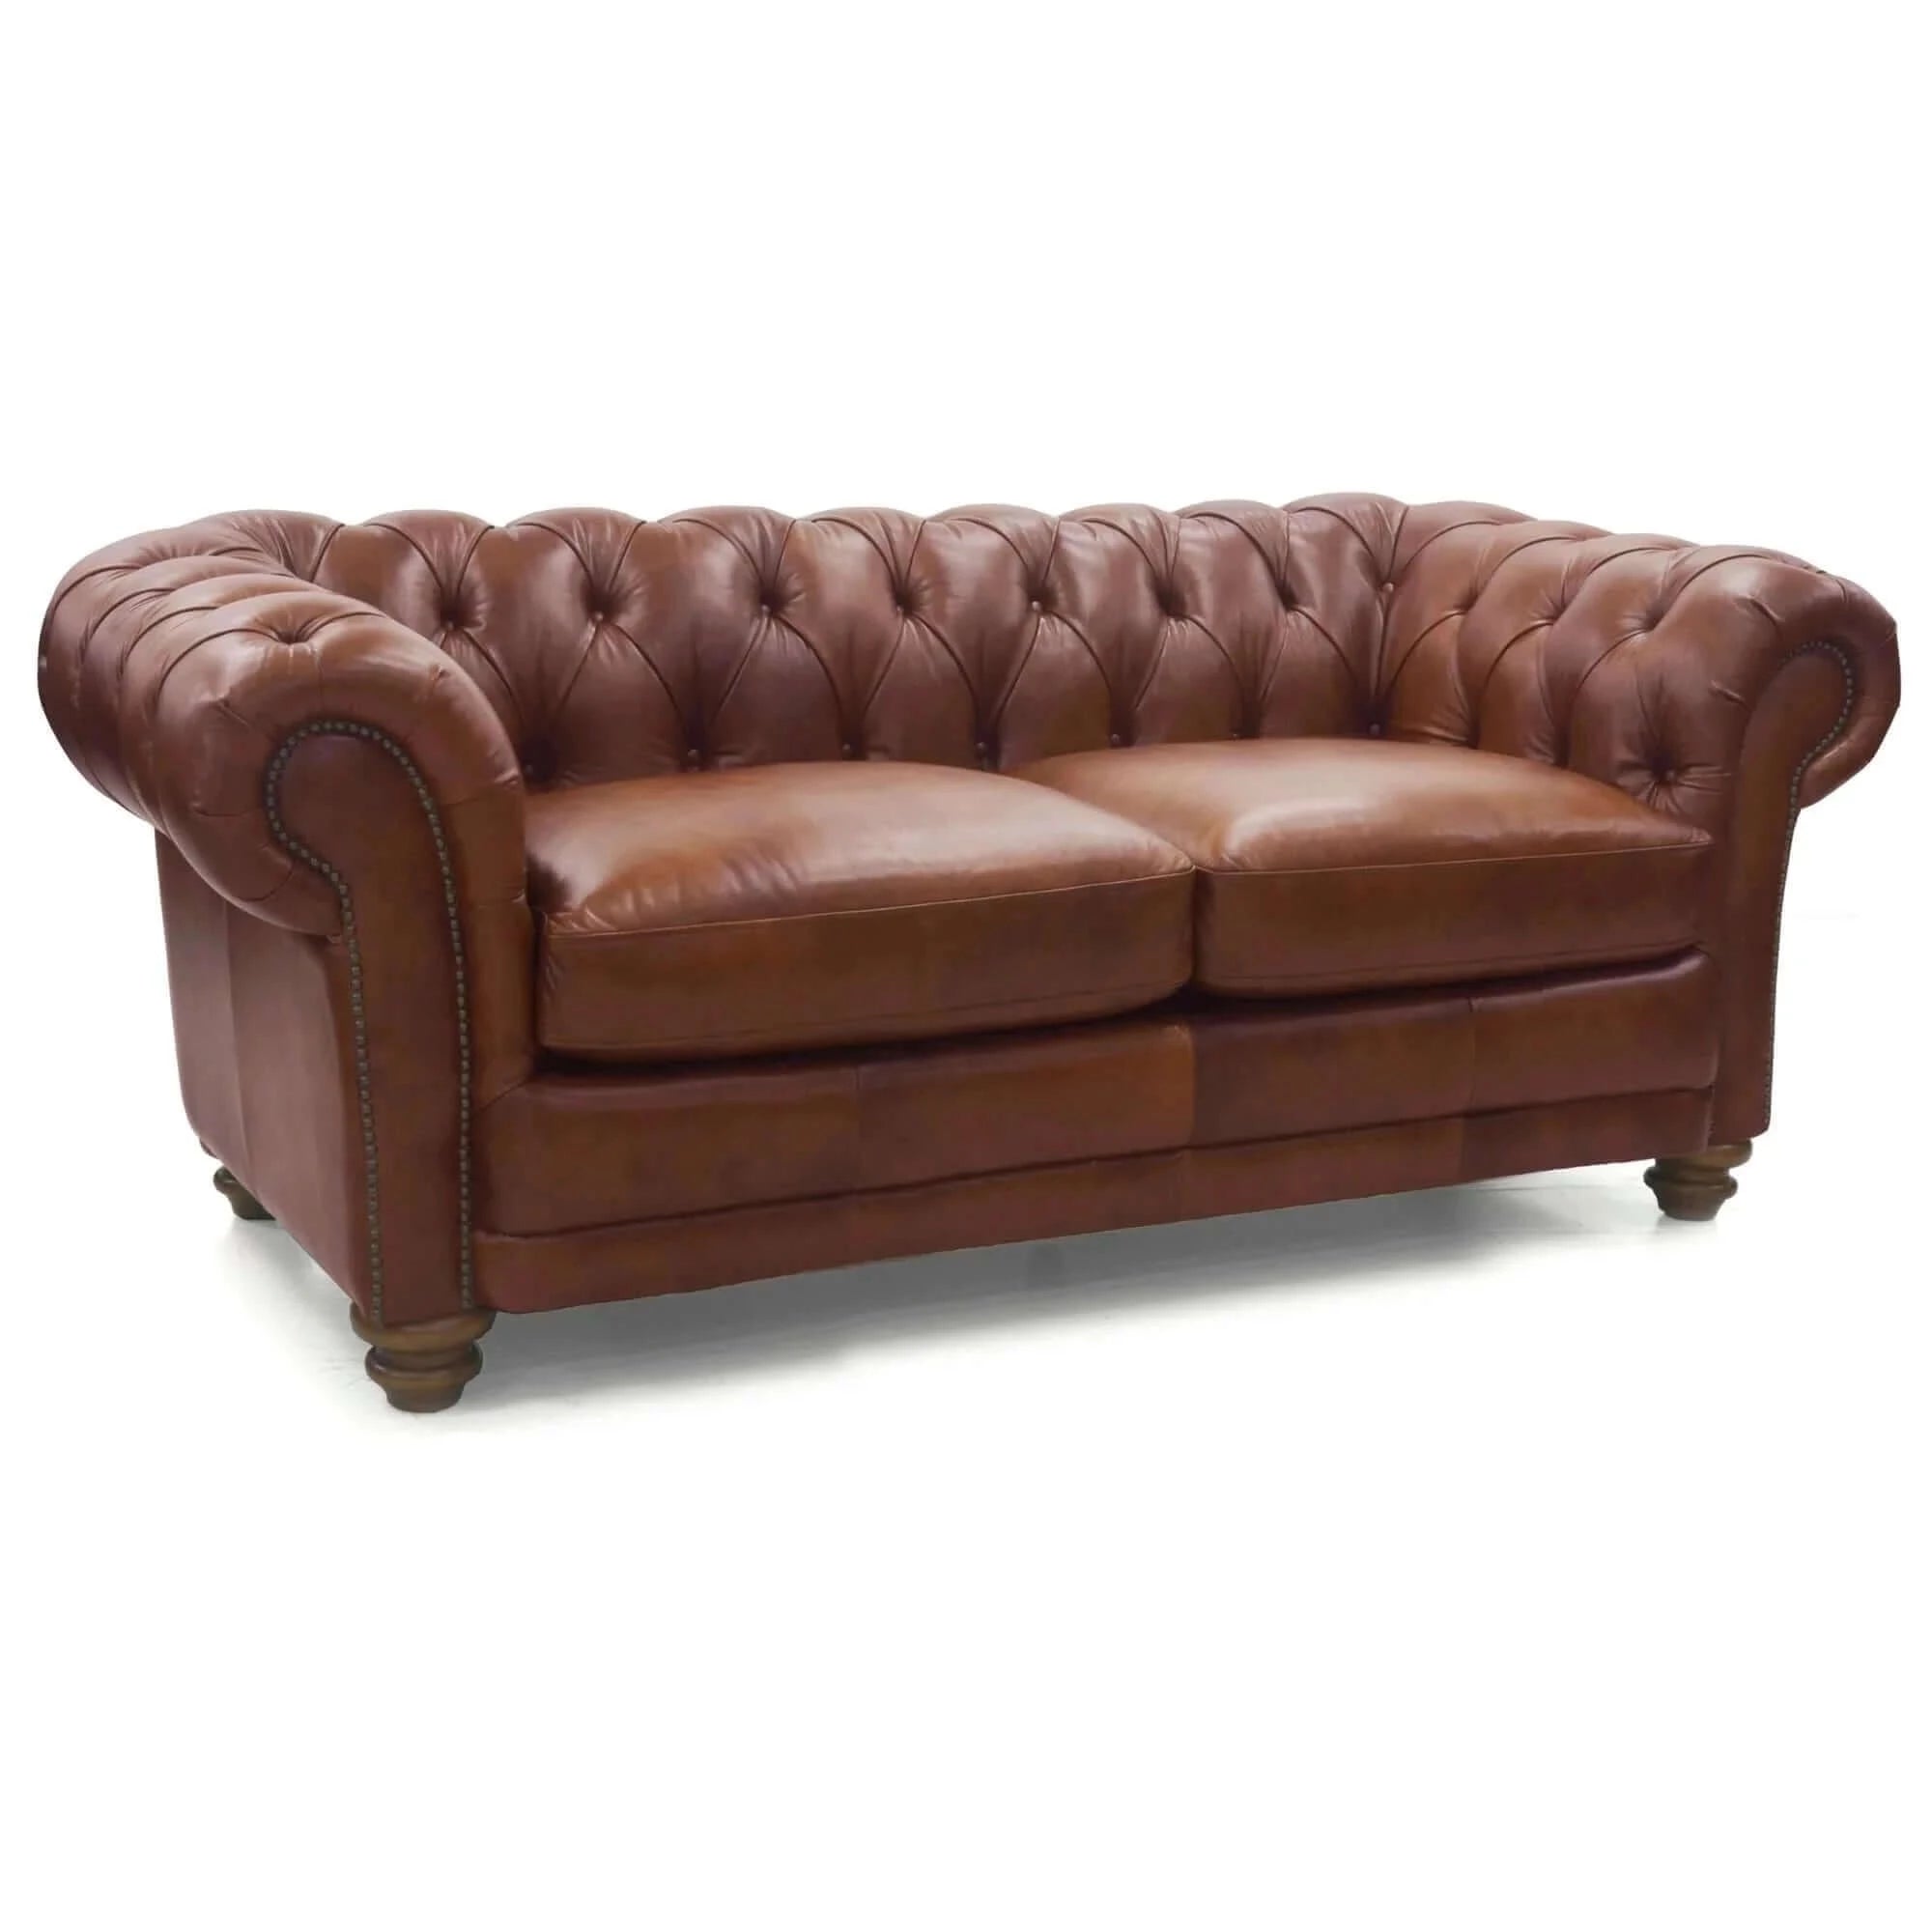 Buy Sonny 2.5 Seater Genuine Leather Sofa Chestfield Lounge Couch – Upinteriors-Upinteriors